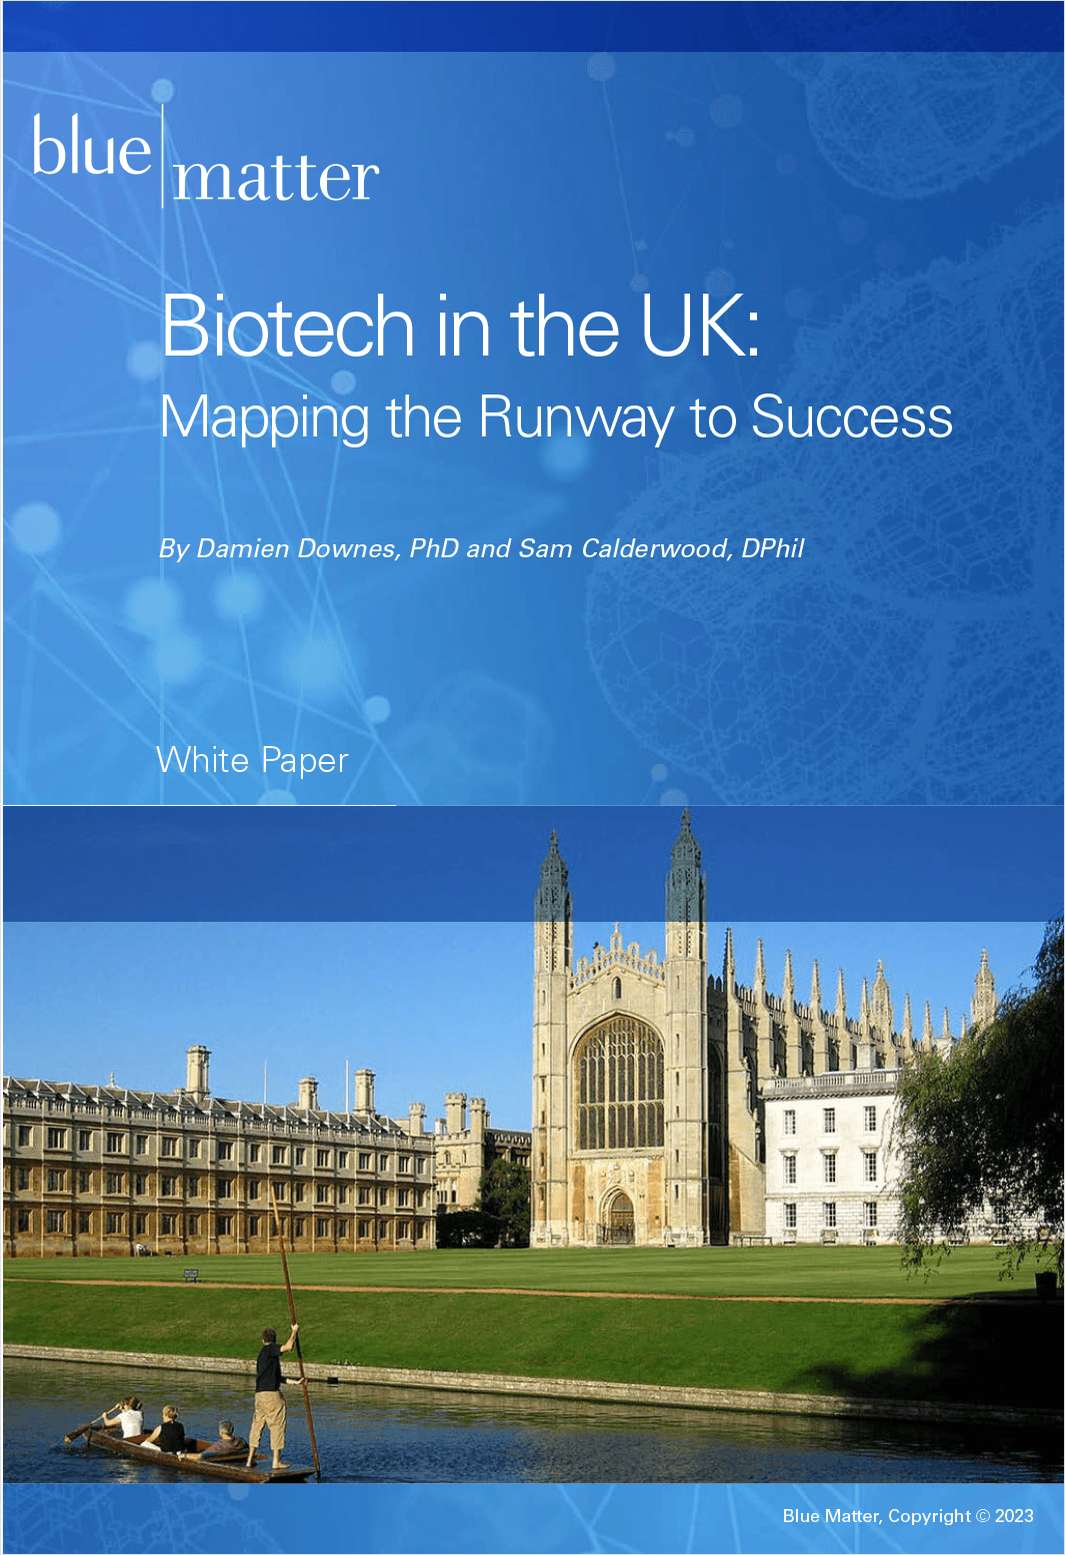 Biotech in the UK: Mapping the Runway to Success